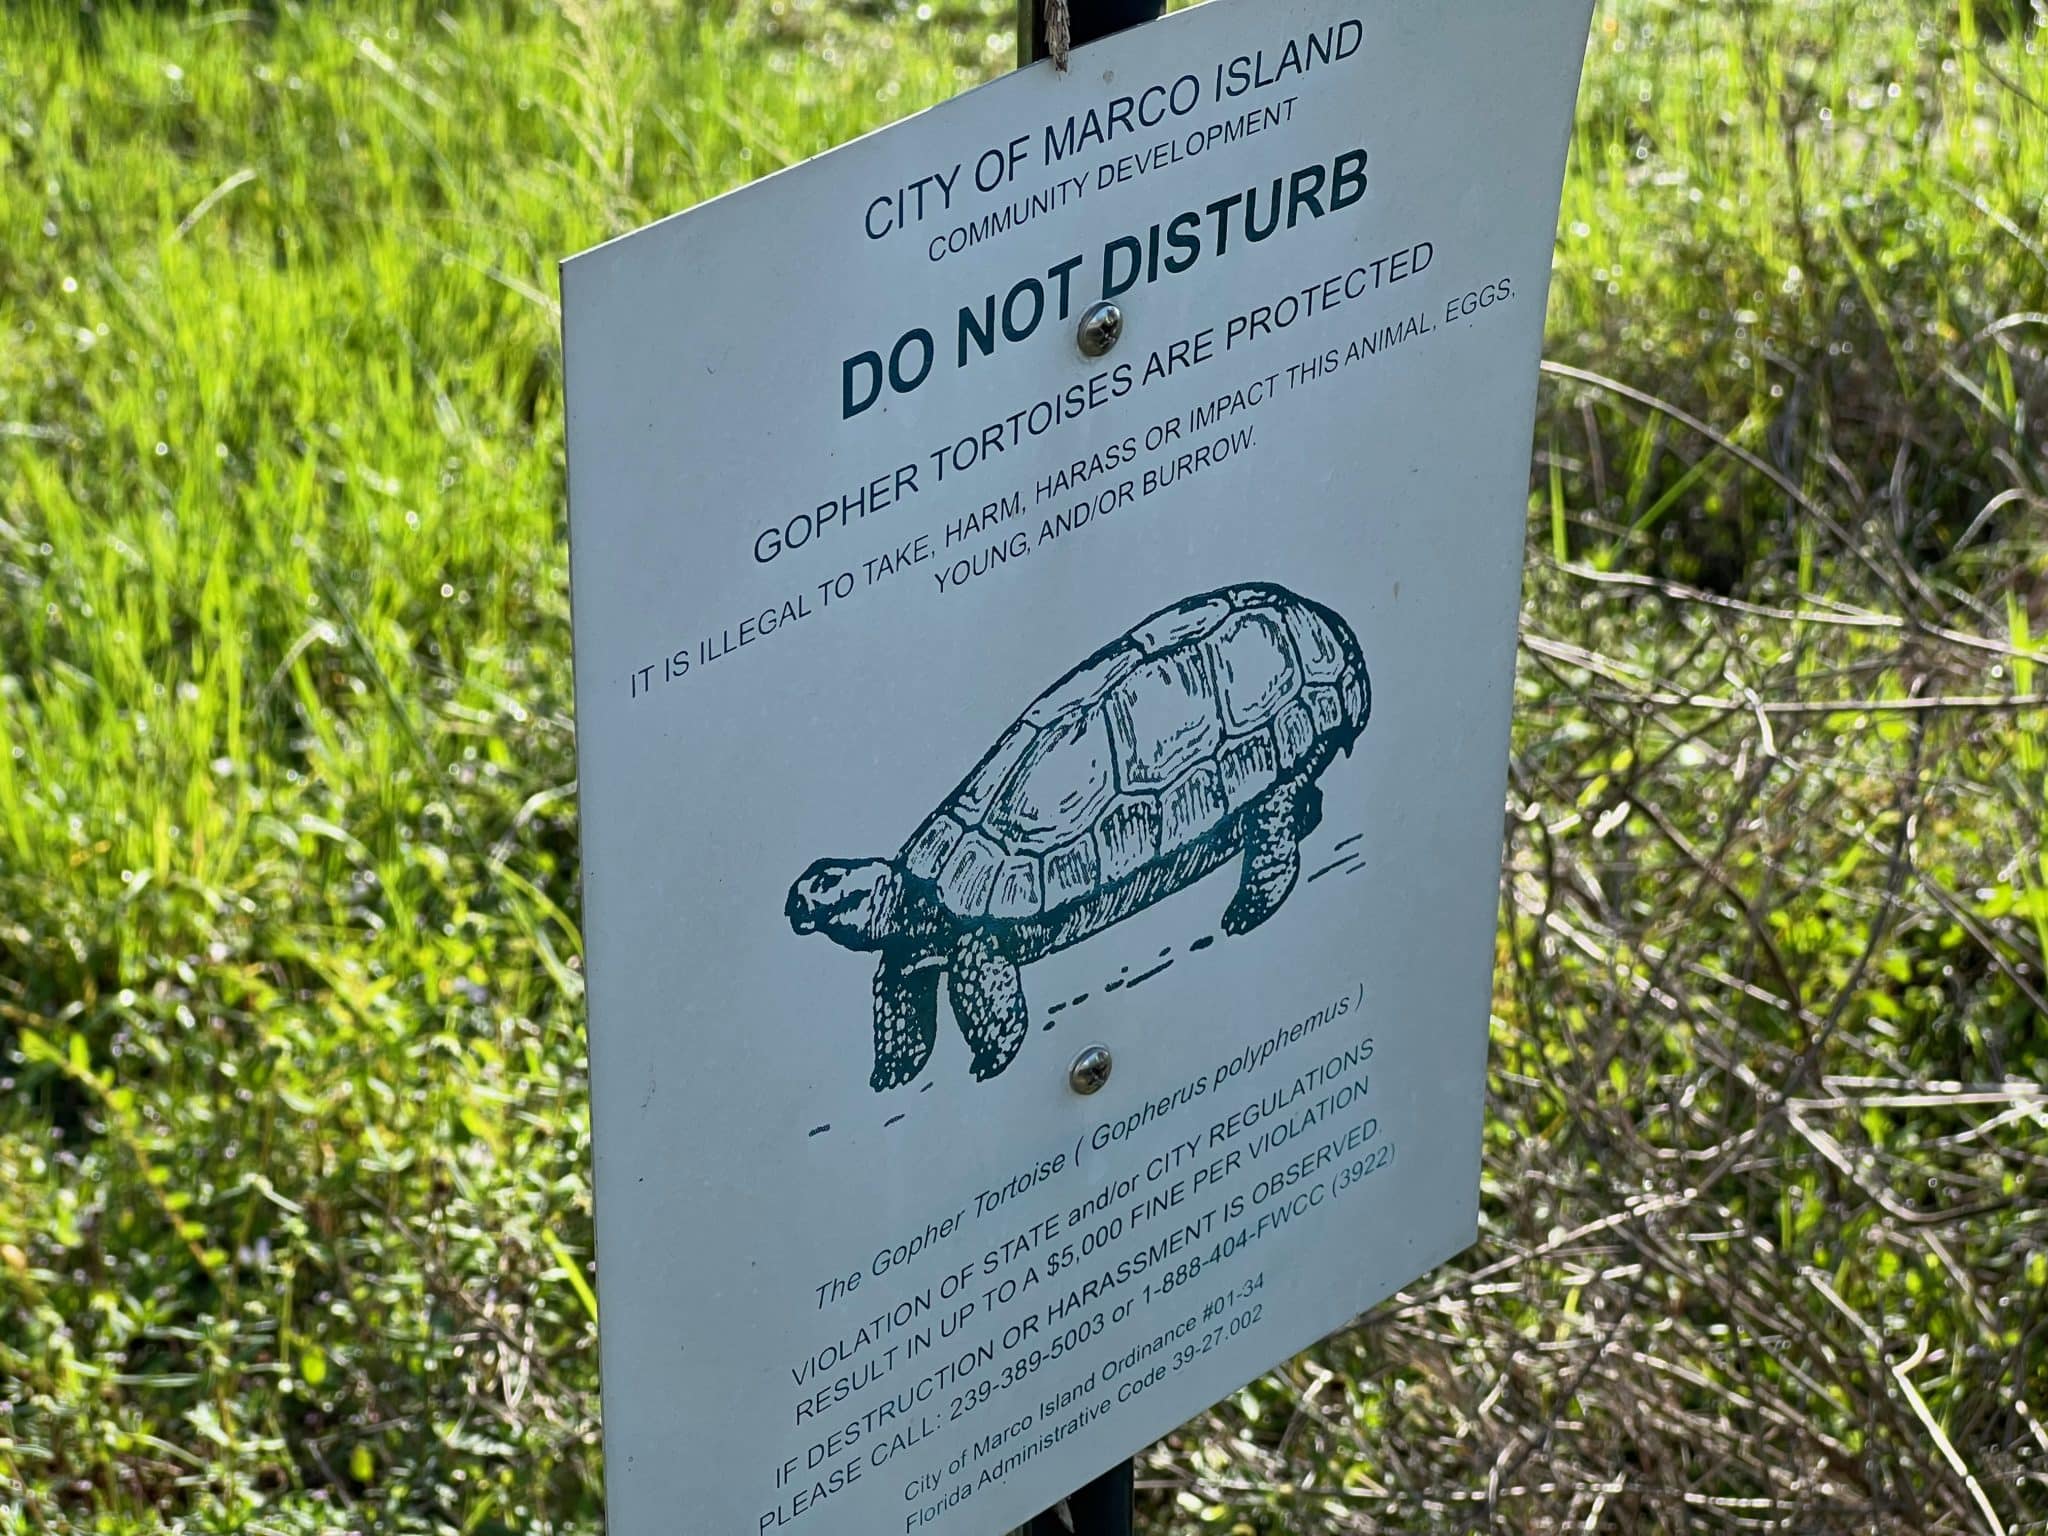 The area has more than 200 protected Gopher tortoise burrows as well as dozens of Burrowing owls.